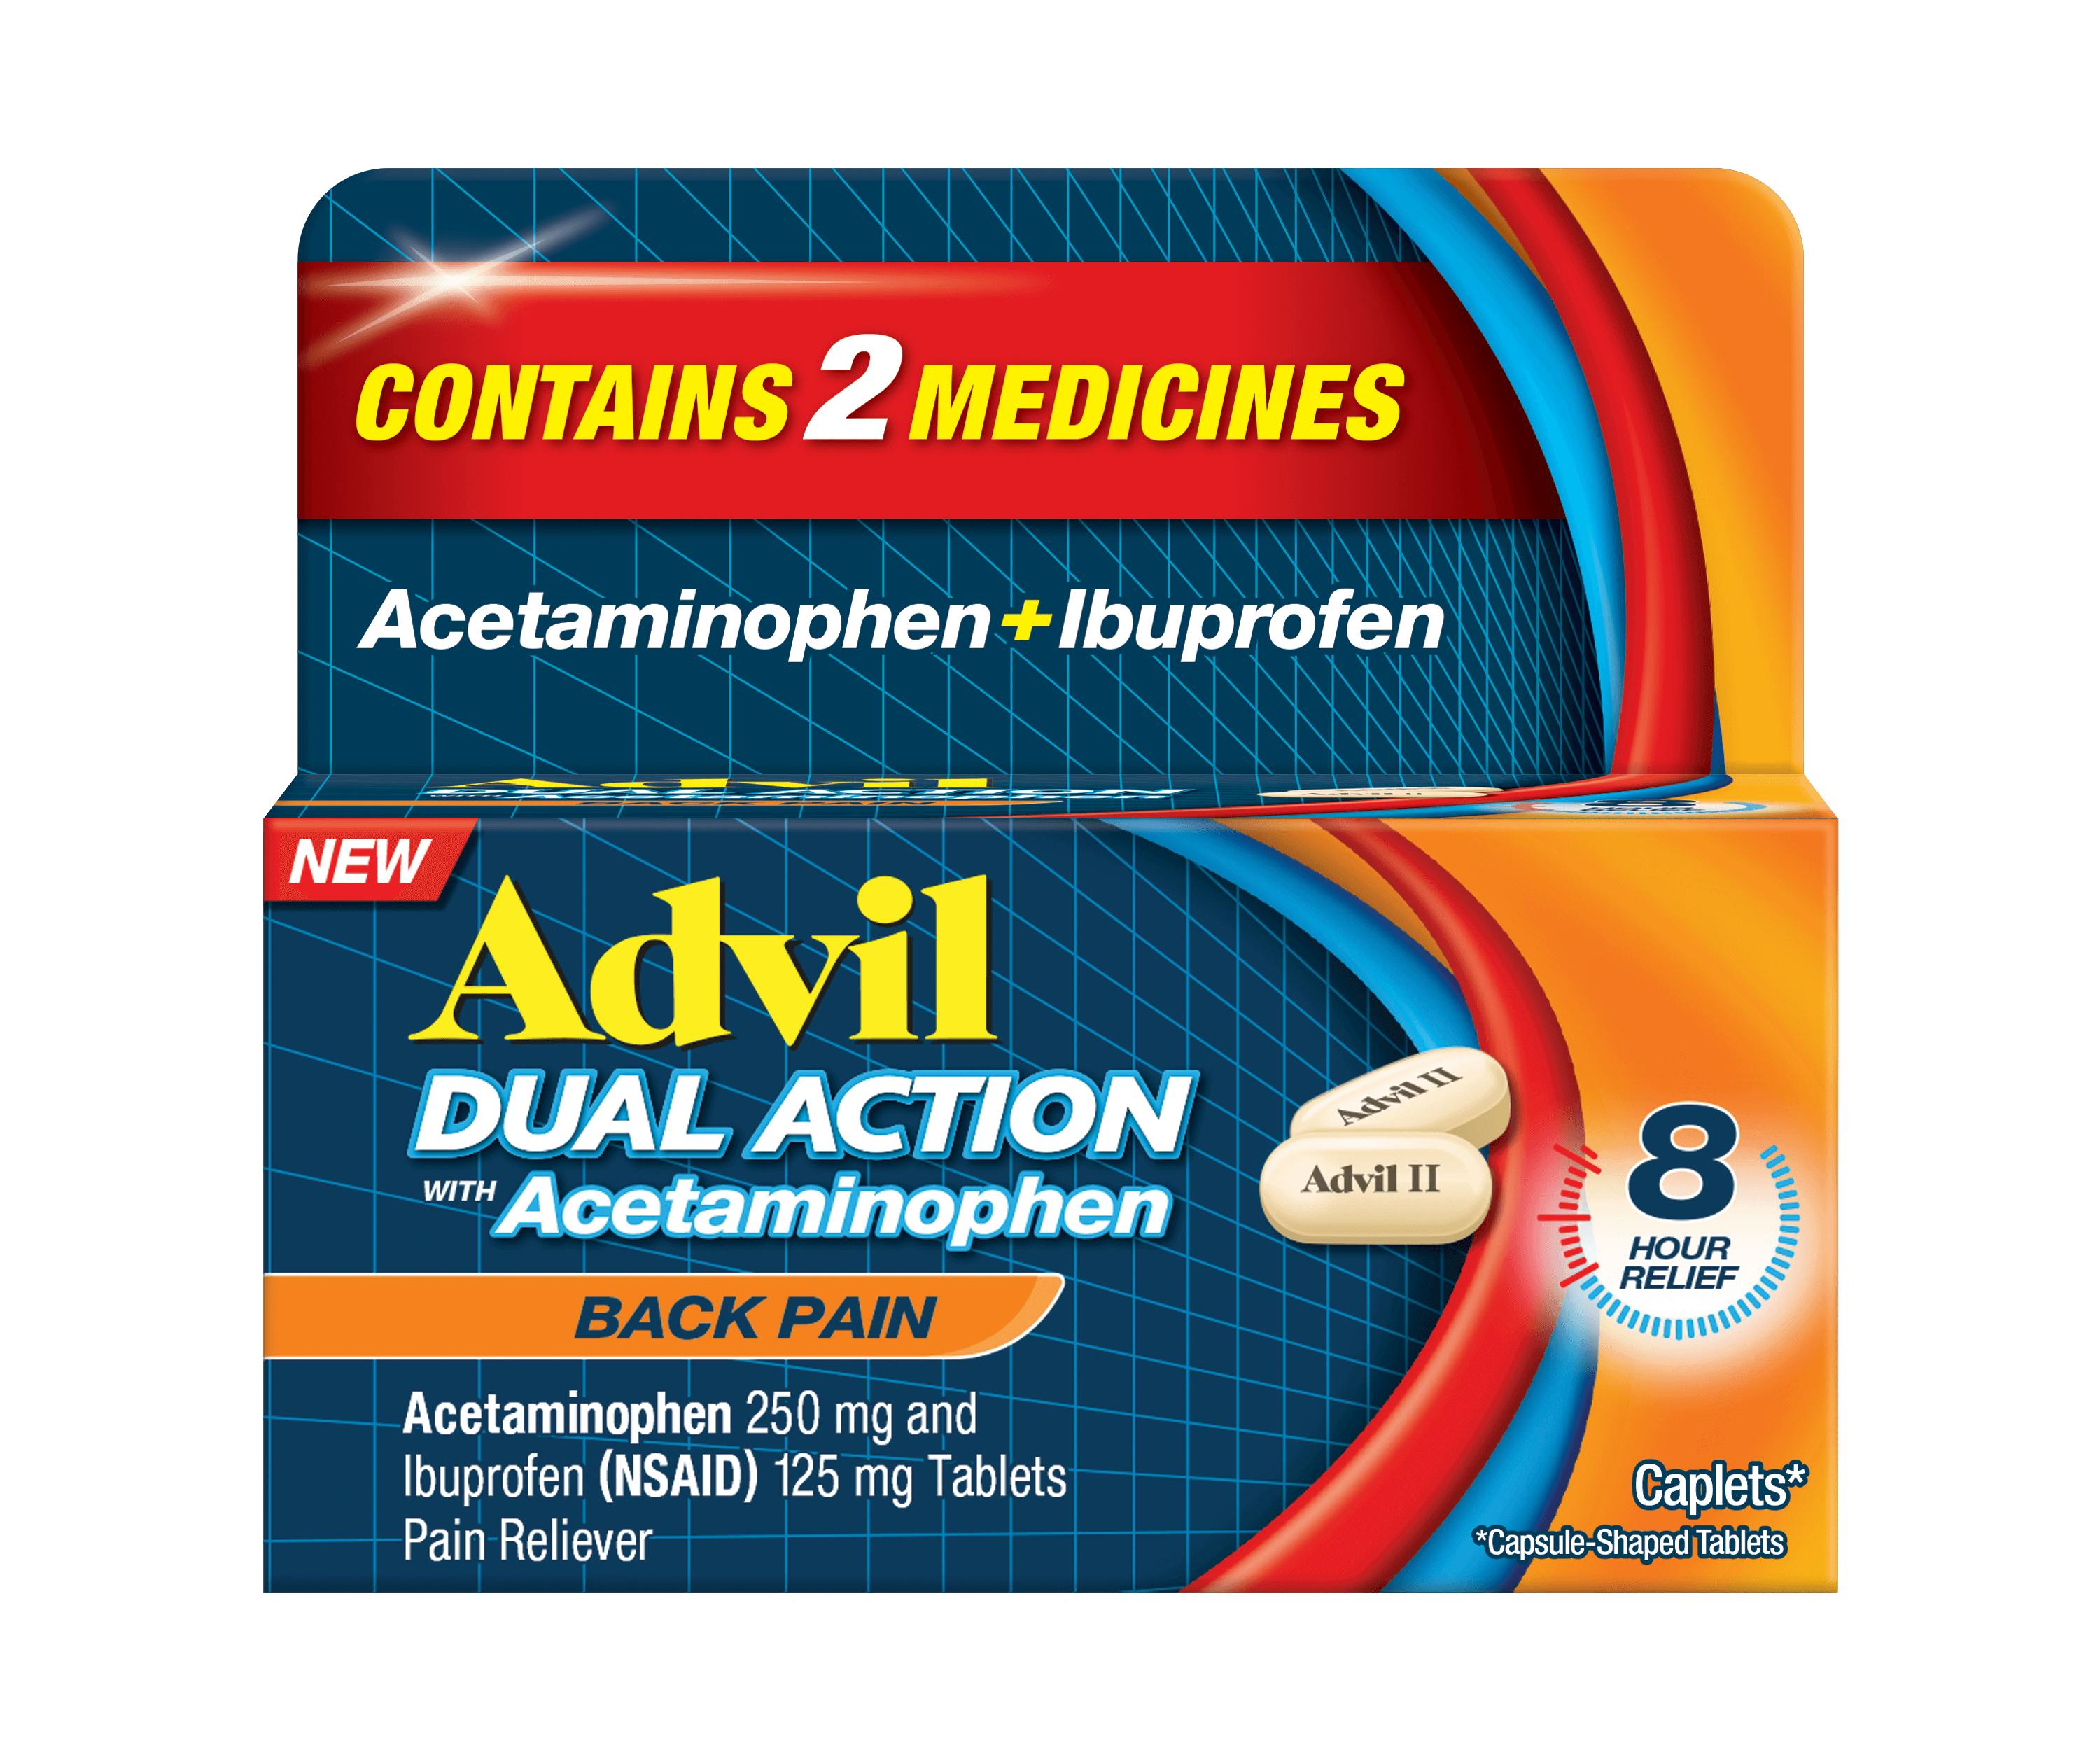 Advil Dual Action Back Caplets, Ibuprofen with Acetaminophen, 18 Pain Relief Capsule-Shaped Tablets 